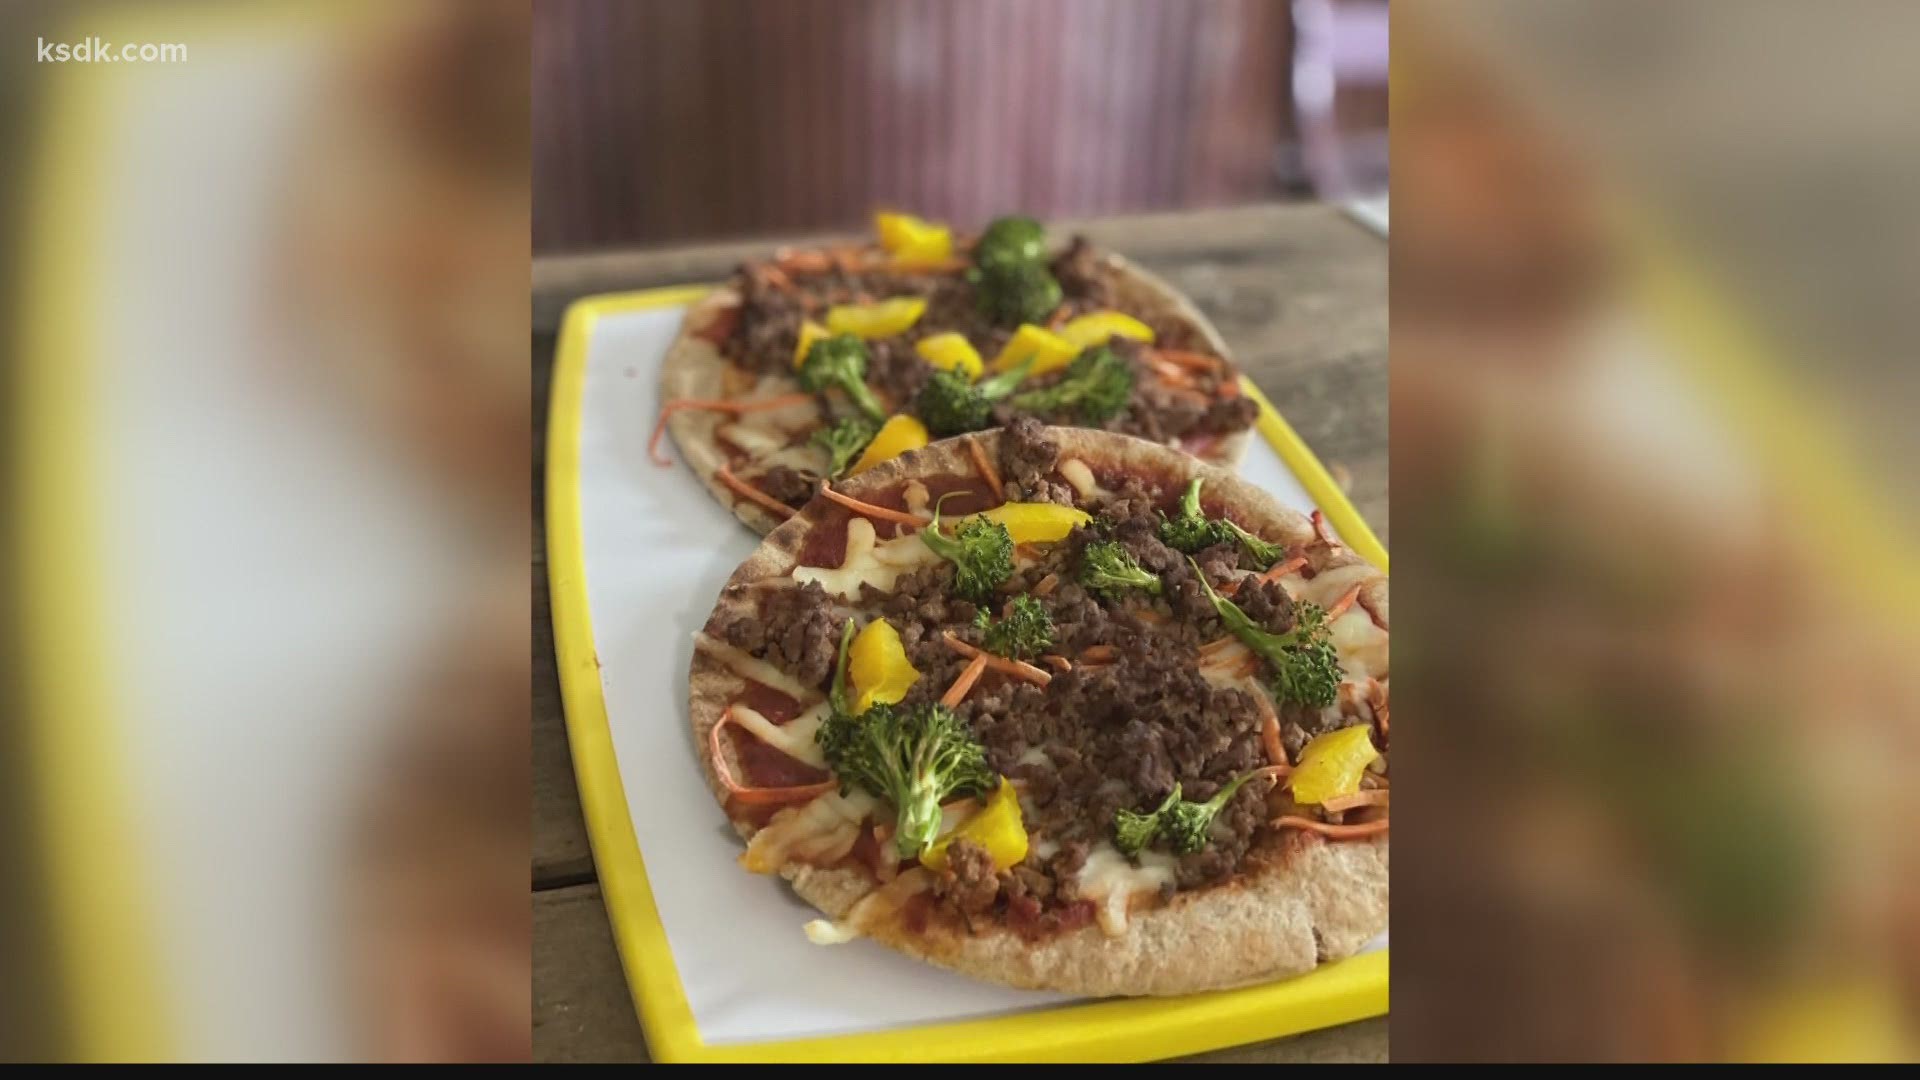 Luella Gregory of the Missouri Beef Council shares a recipe for Beef and Garden Vegetable Pizza.